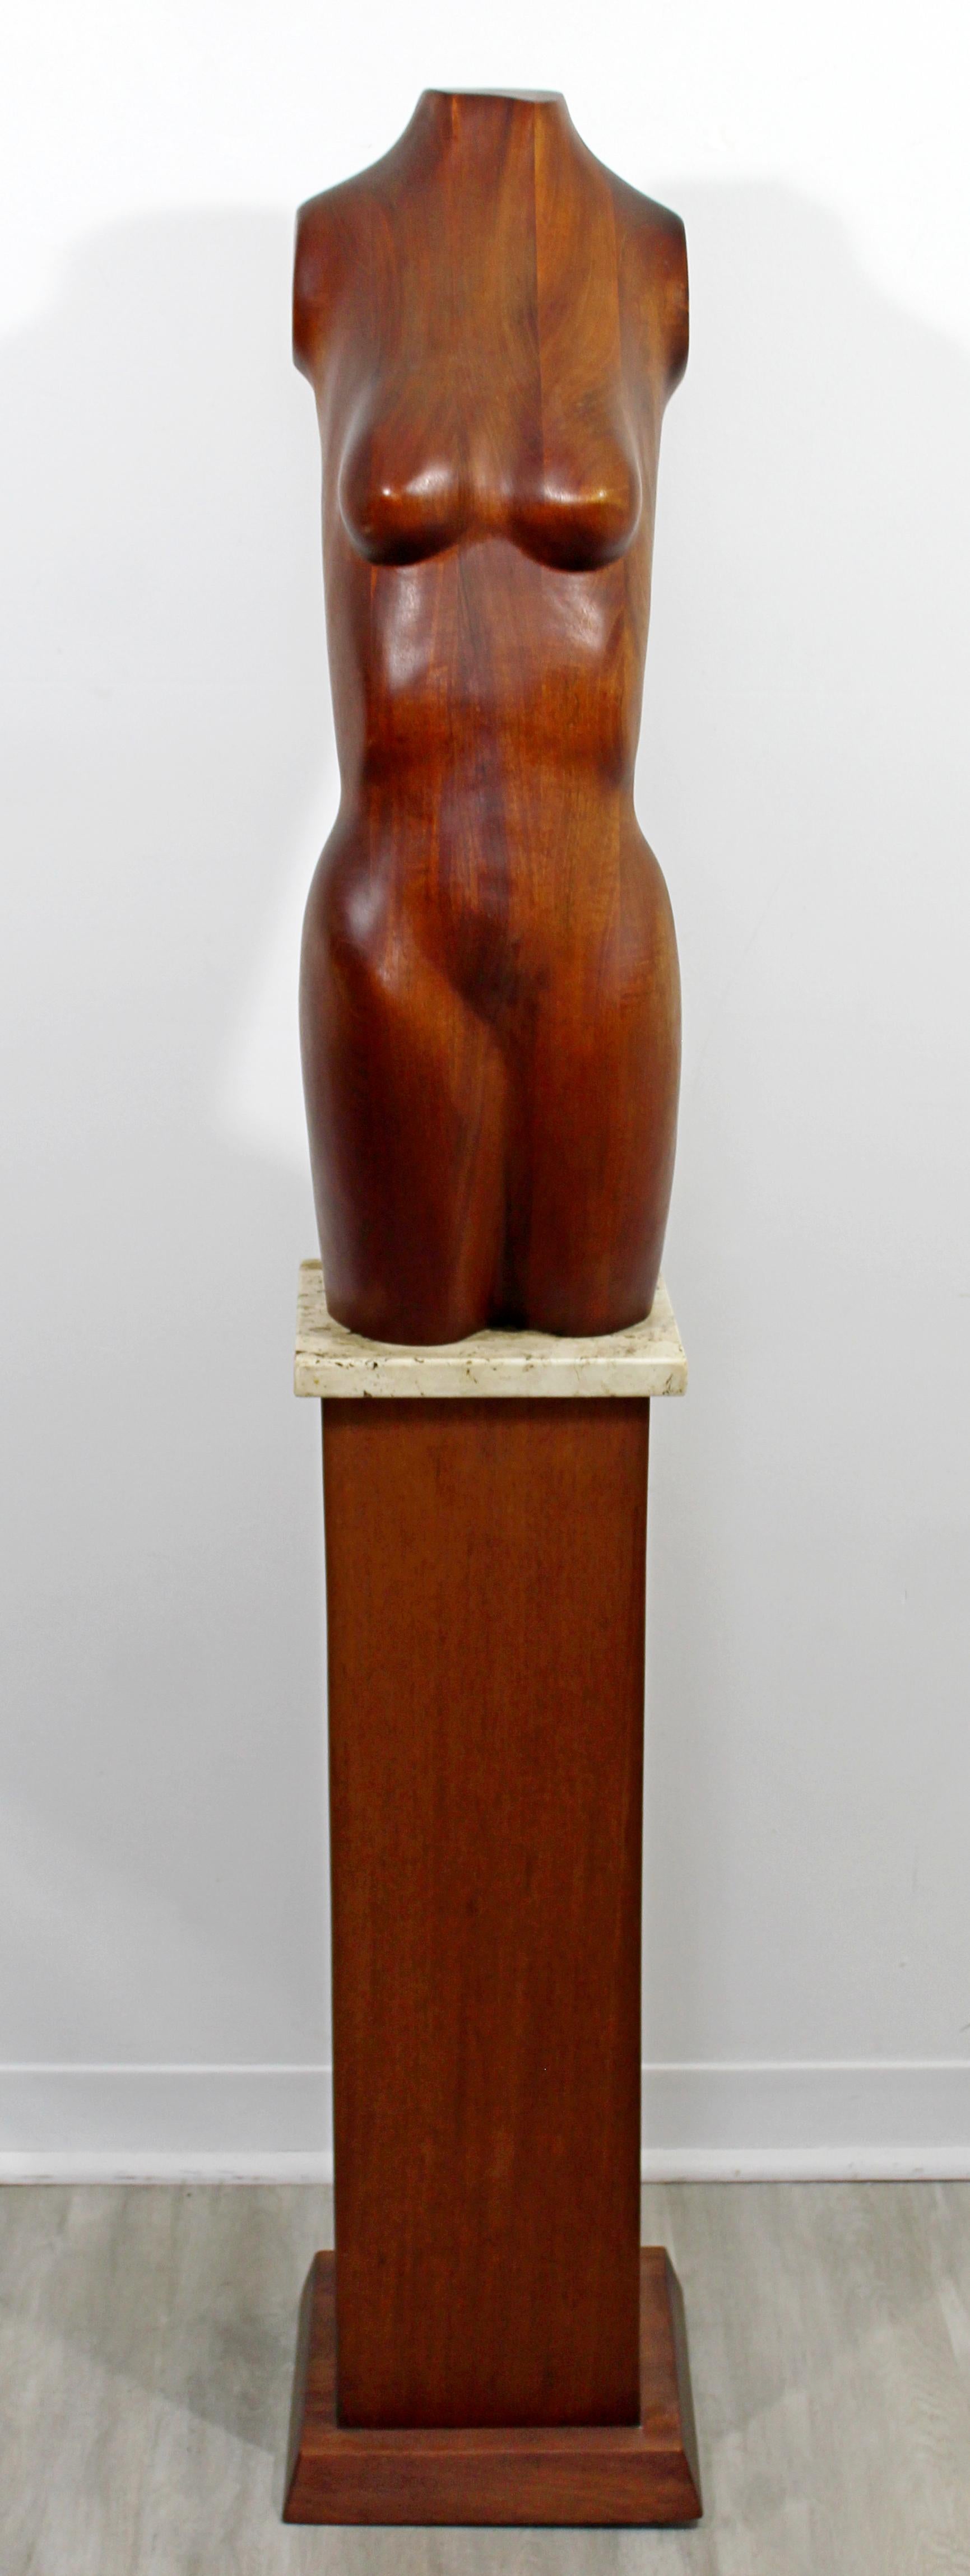 For your consideration is an idyllic, wood art sculpture of a nude bust, signed on the base by Danish artist Gert Olsen and dated 1979. In excellent vintage condition. The dimensions of the bust are 8